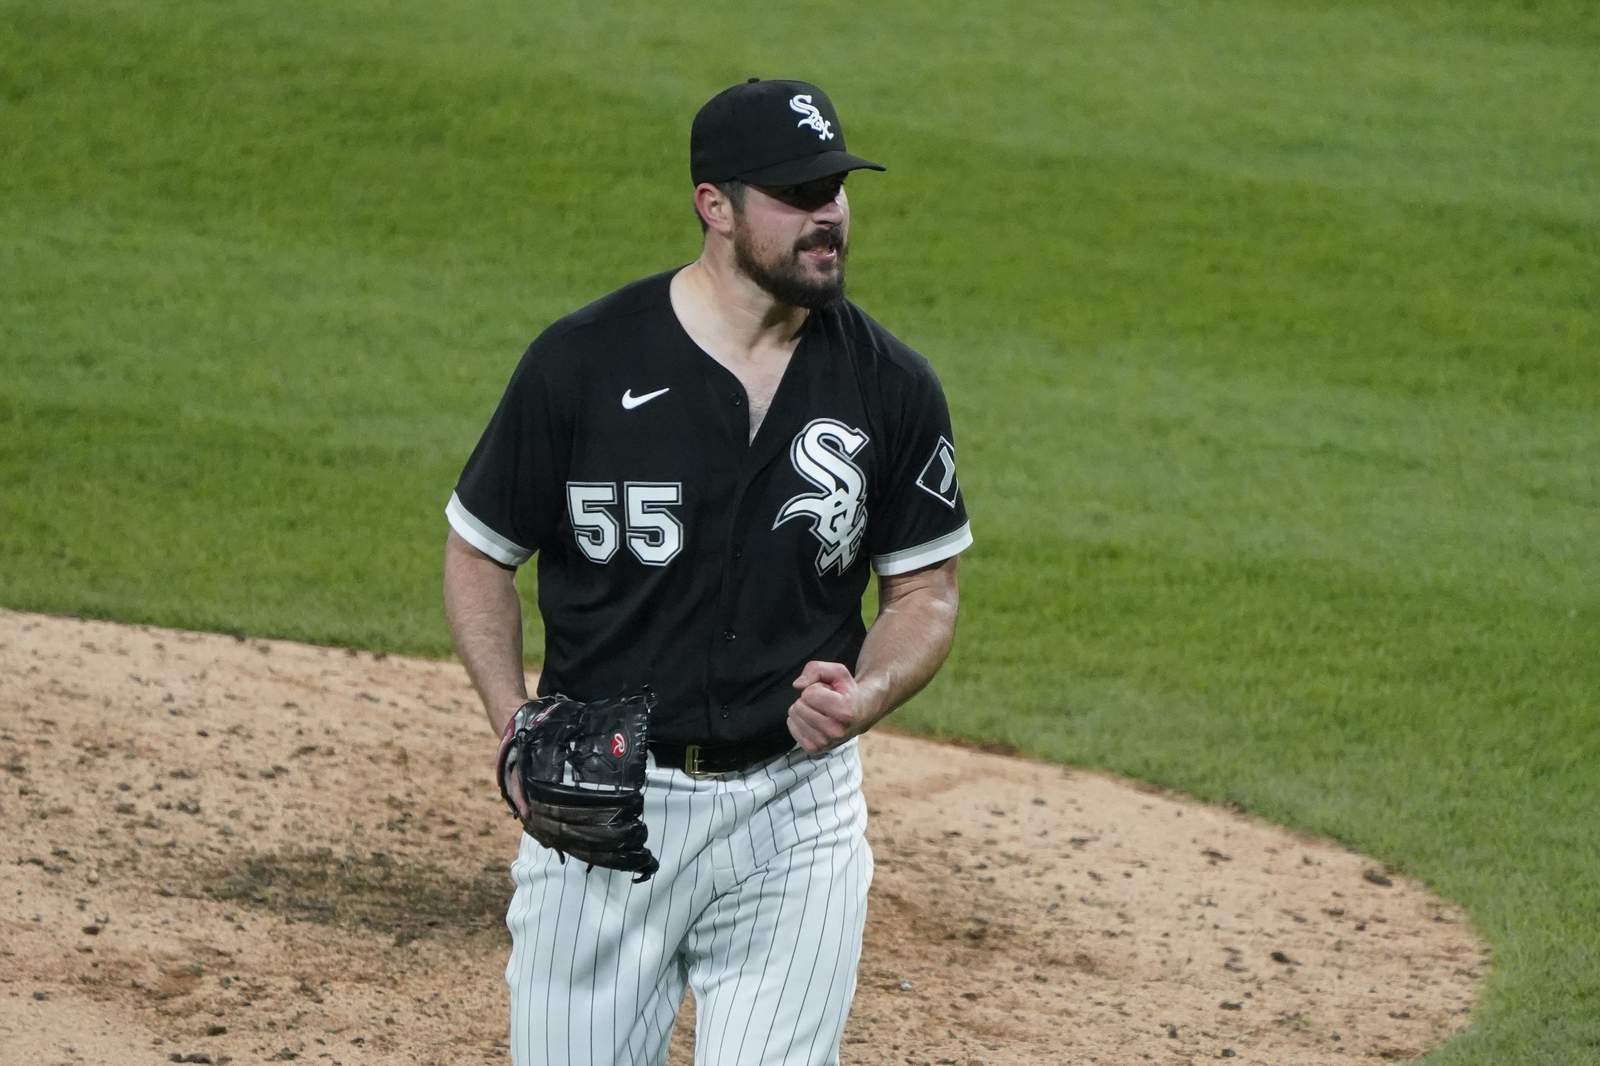 White Sox LHP Rodón loses perfect game on HBP in 9th